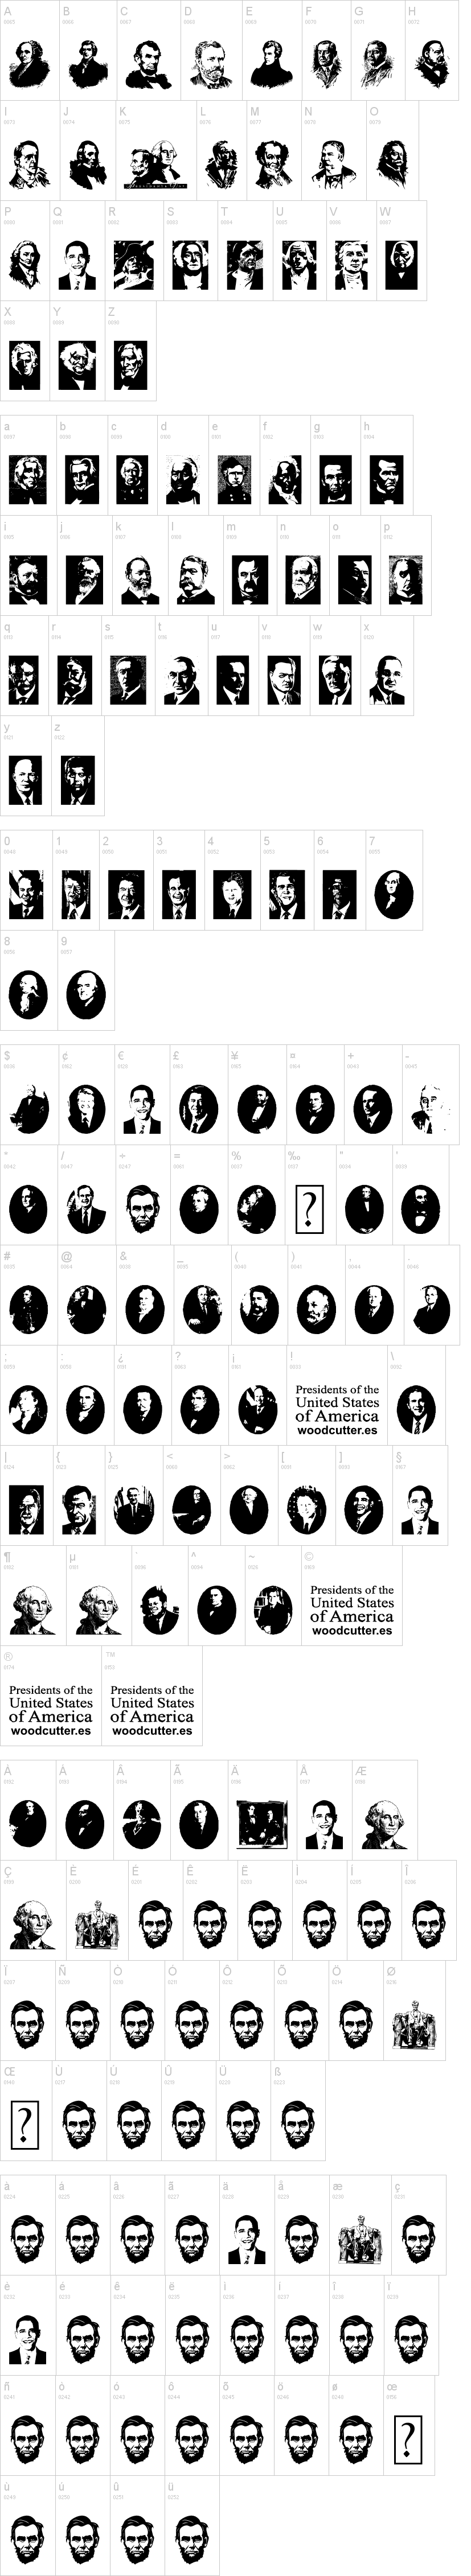 Presidents of the United States of America